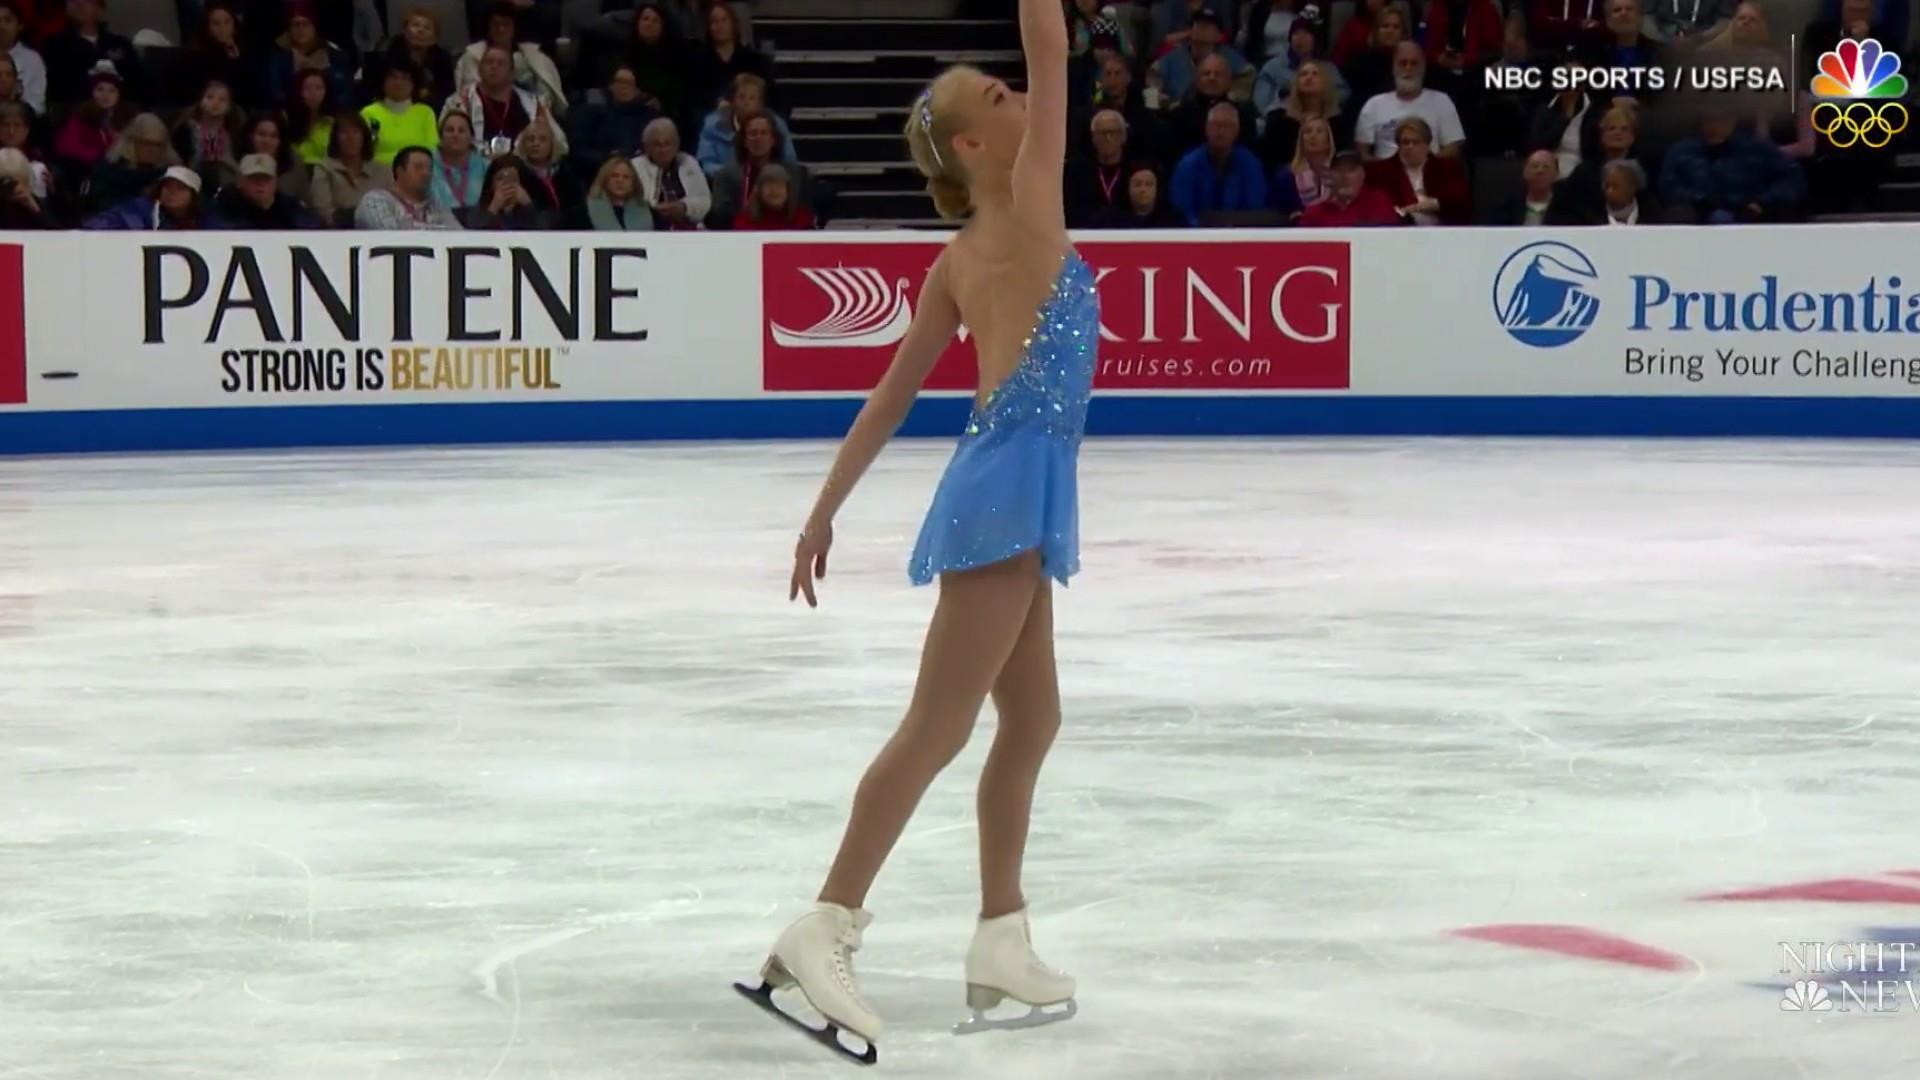 In Cinderella Story Bradie Tennell Shines At The Olympics